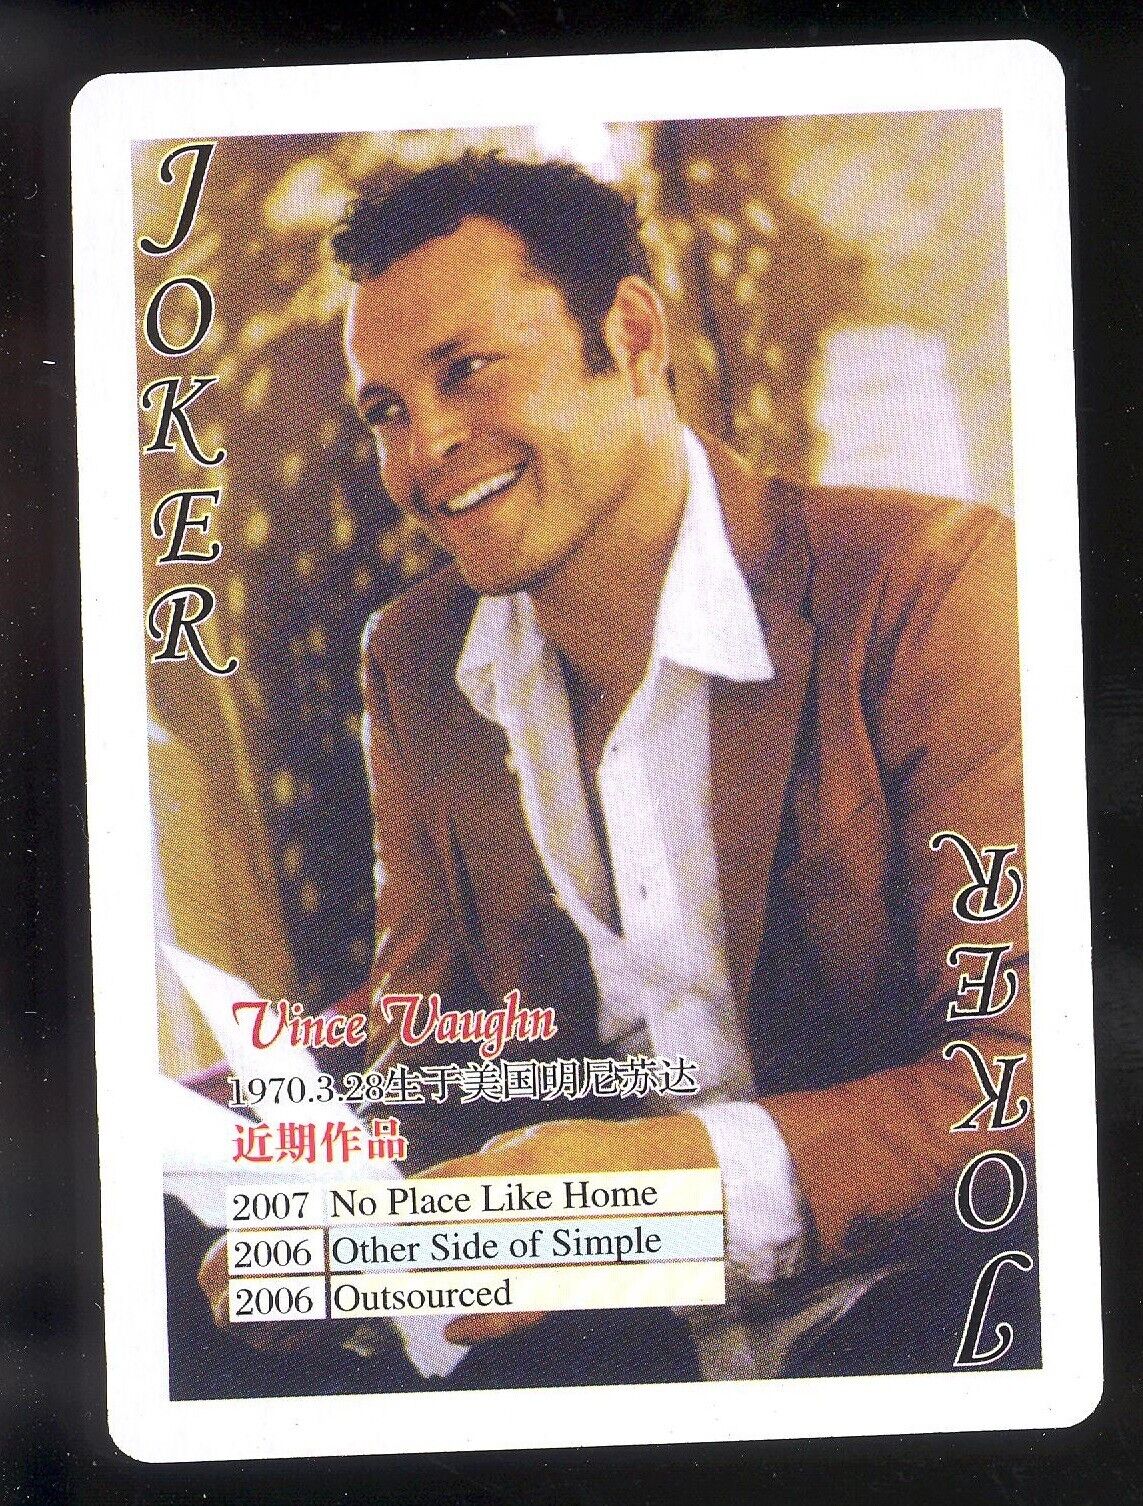 Vince Vaughn Hollywood Movie Film Star Playing Trading Card